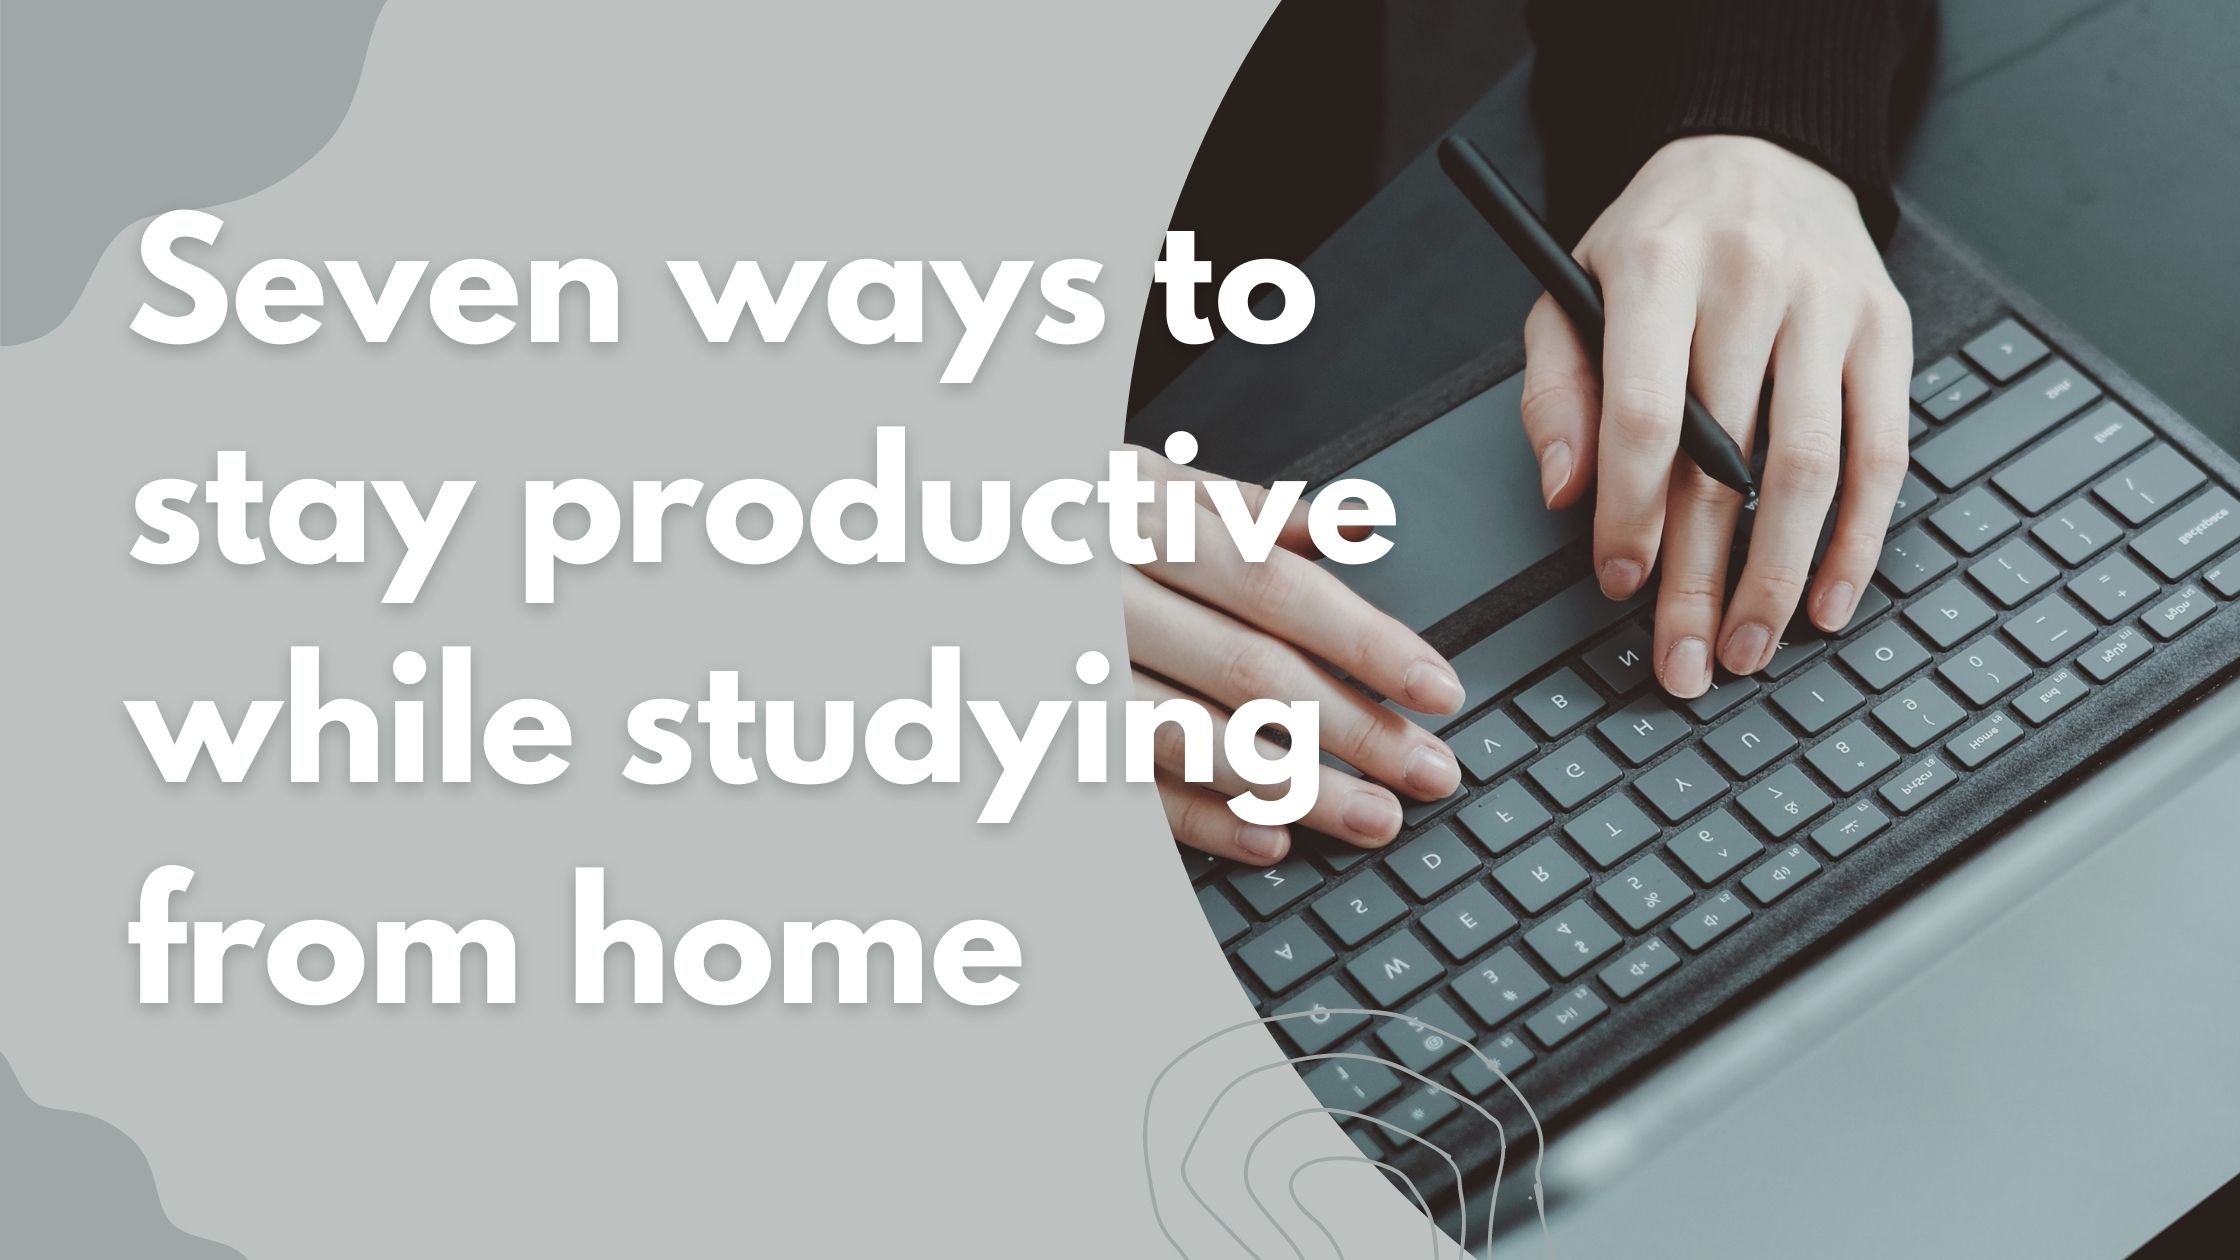 Seven ways to stay productive while studying from home